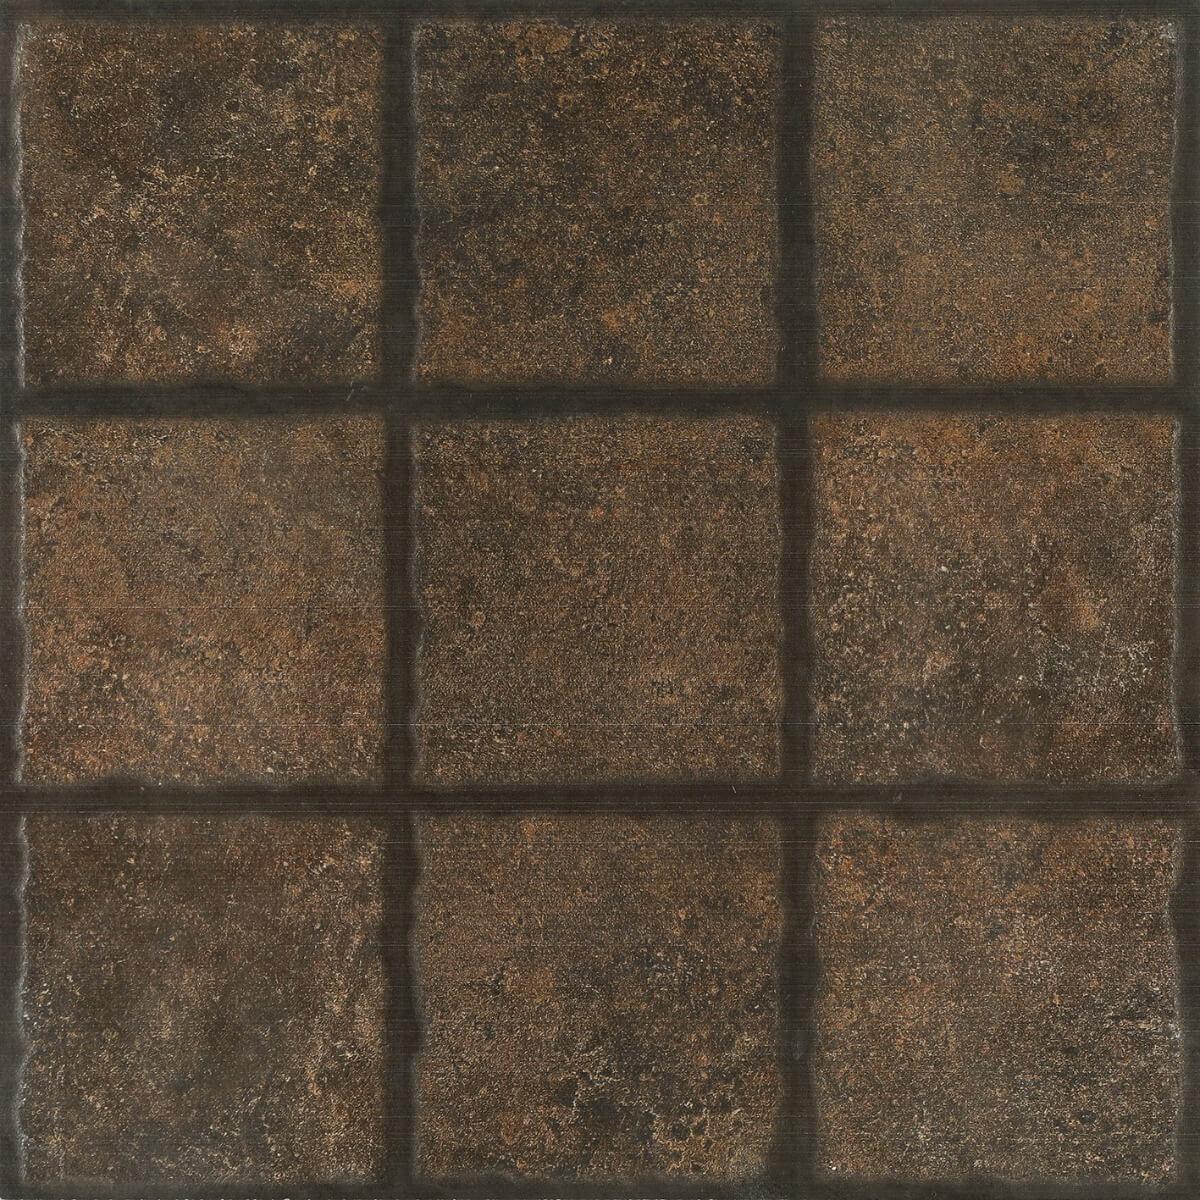 Parking Tiles for Balcony Tiles, Swimming Pool Tiles, Parking Tiles, Terrace Tiles, Pathway Tiles, Hospital Tiles, Automotive Tiles, High Traffic Tiles, Bar/Restaurant, Commercial/Office, Outdoor Area, Outdoor/Terrace, Porch/Parking